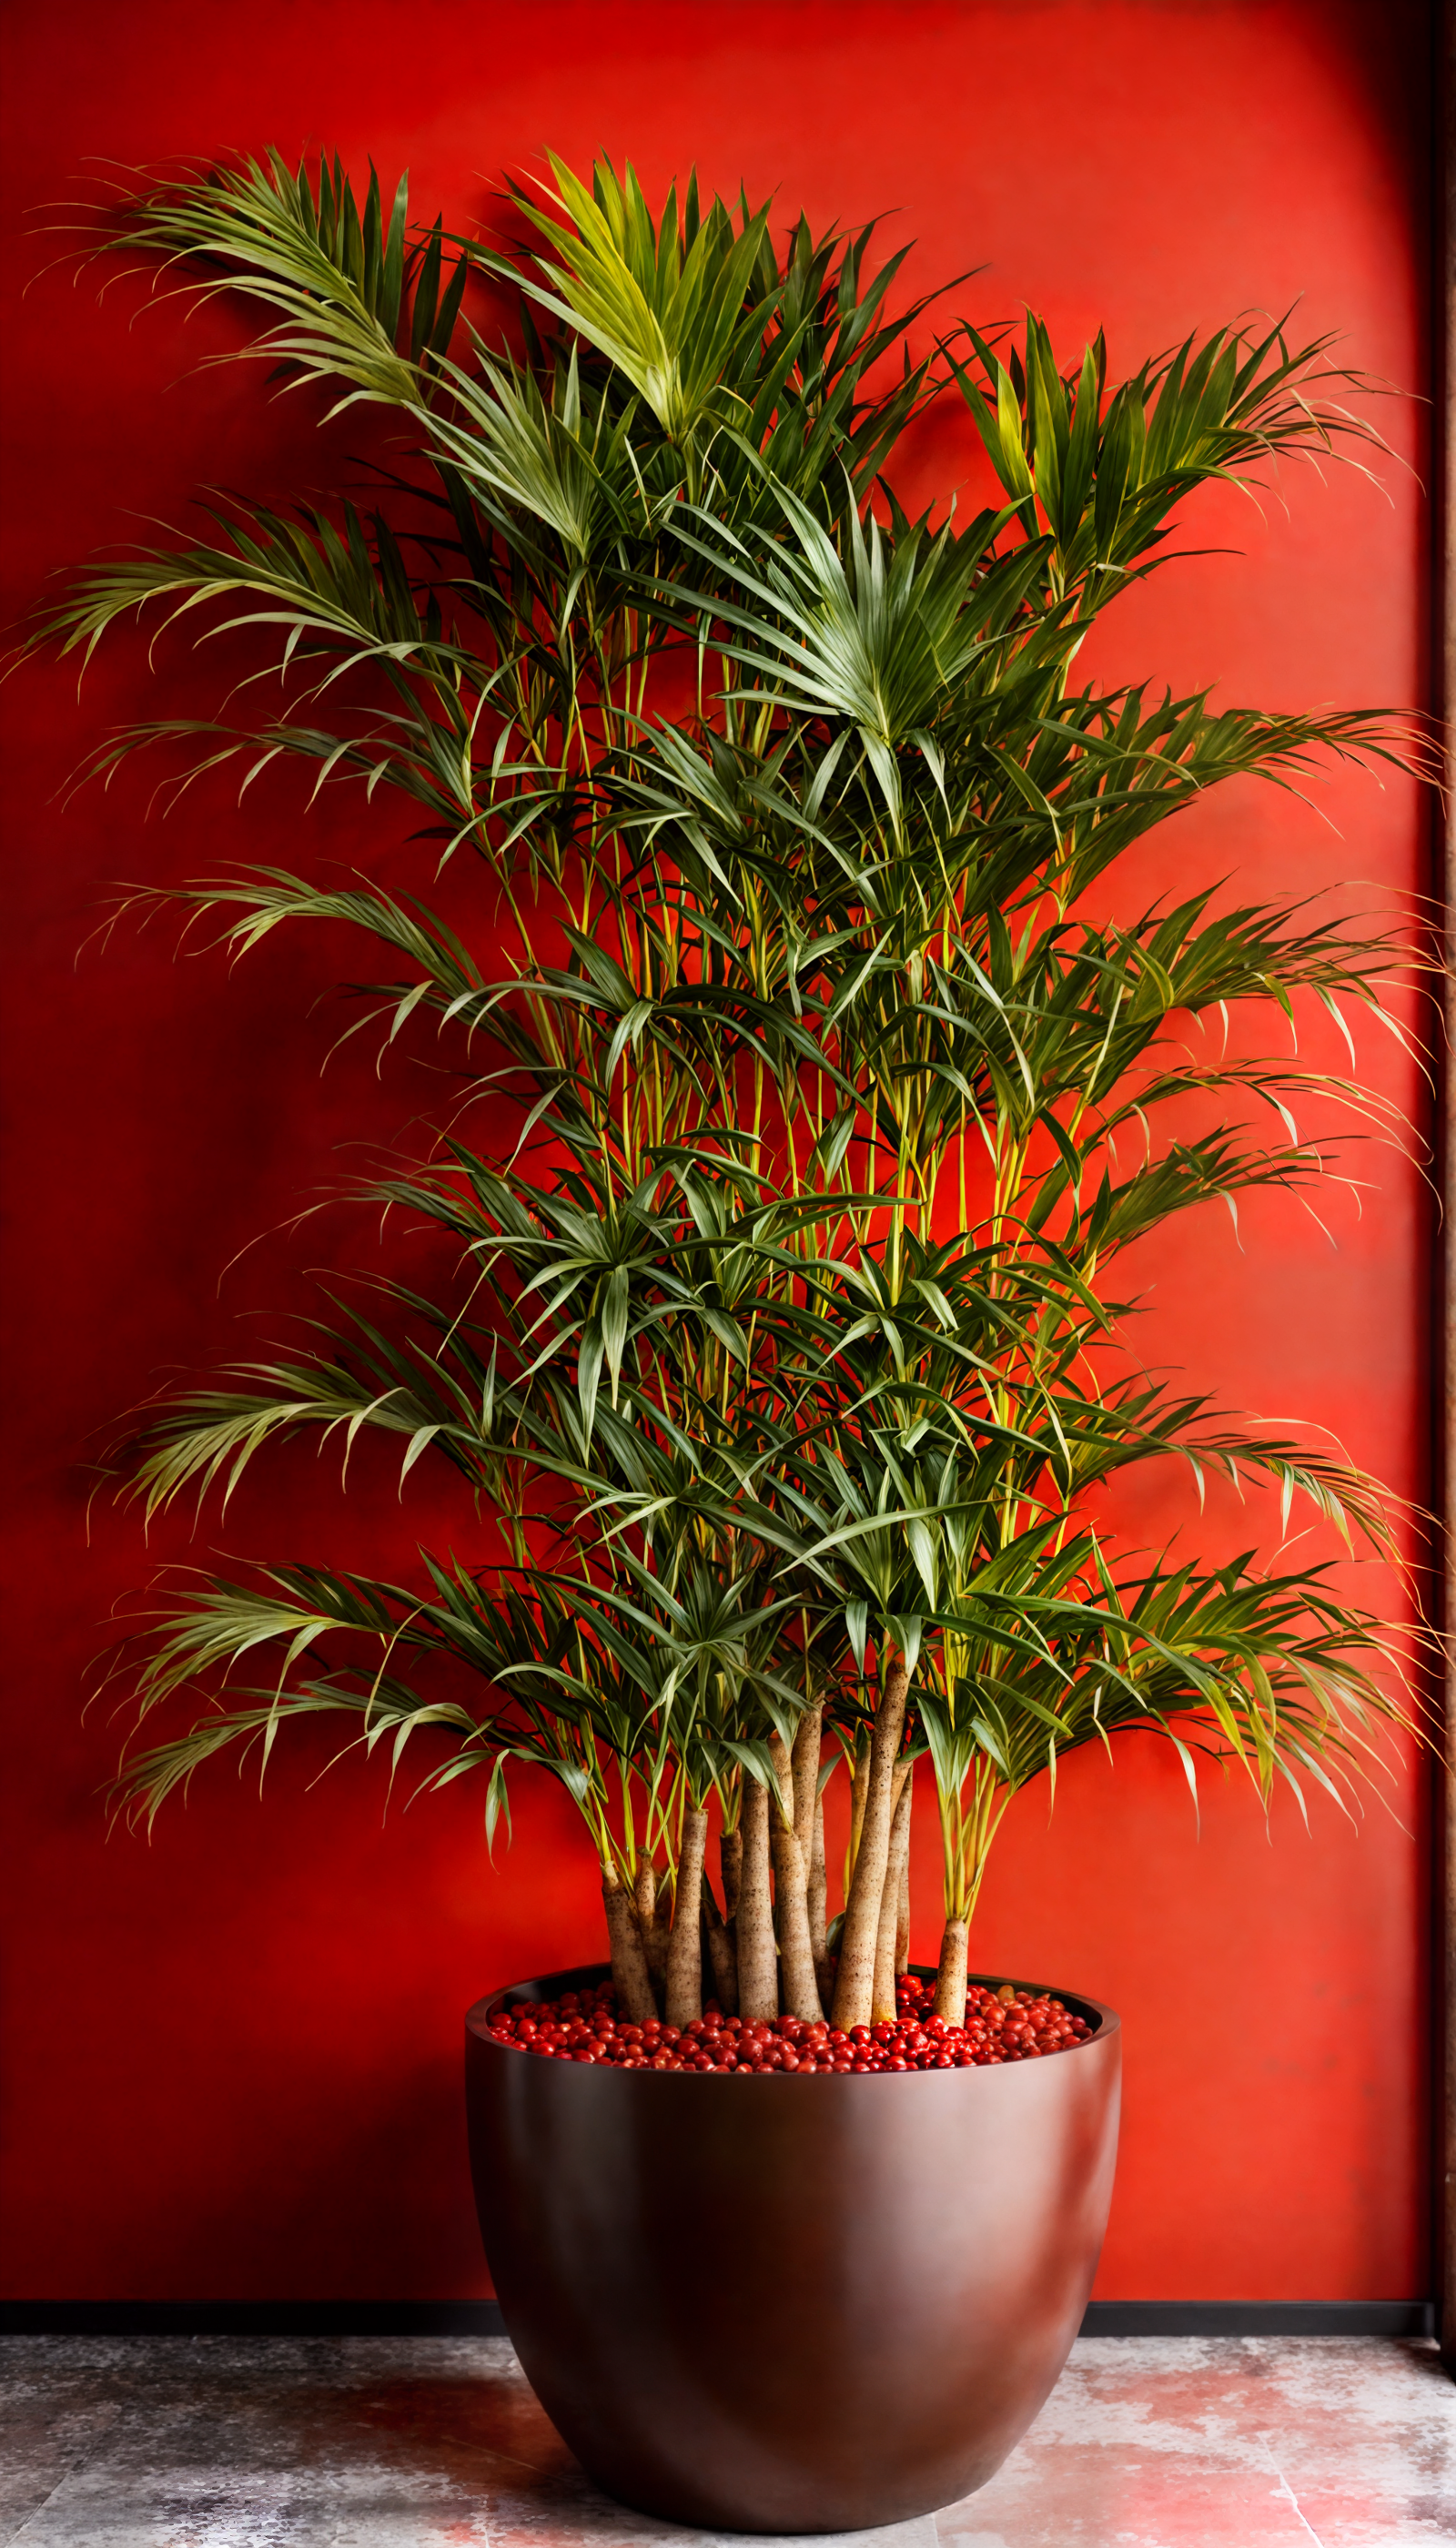 Dypsis lutescens in a planter, with small potted plants on licorice flooring, red curtains in the background.